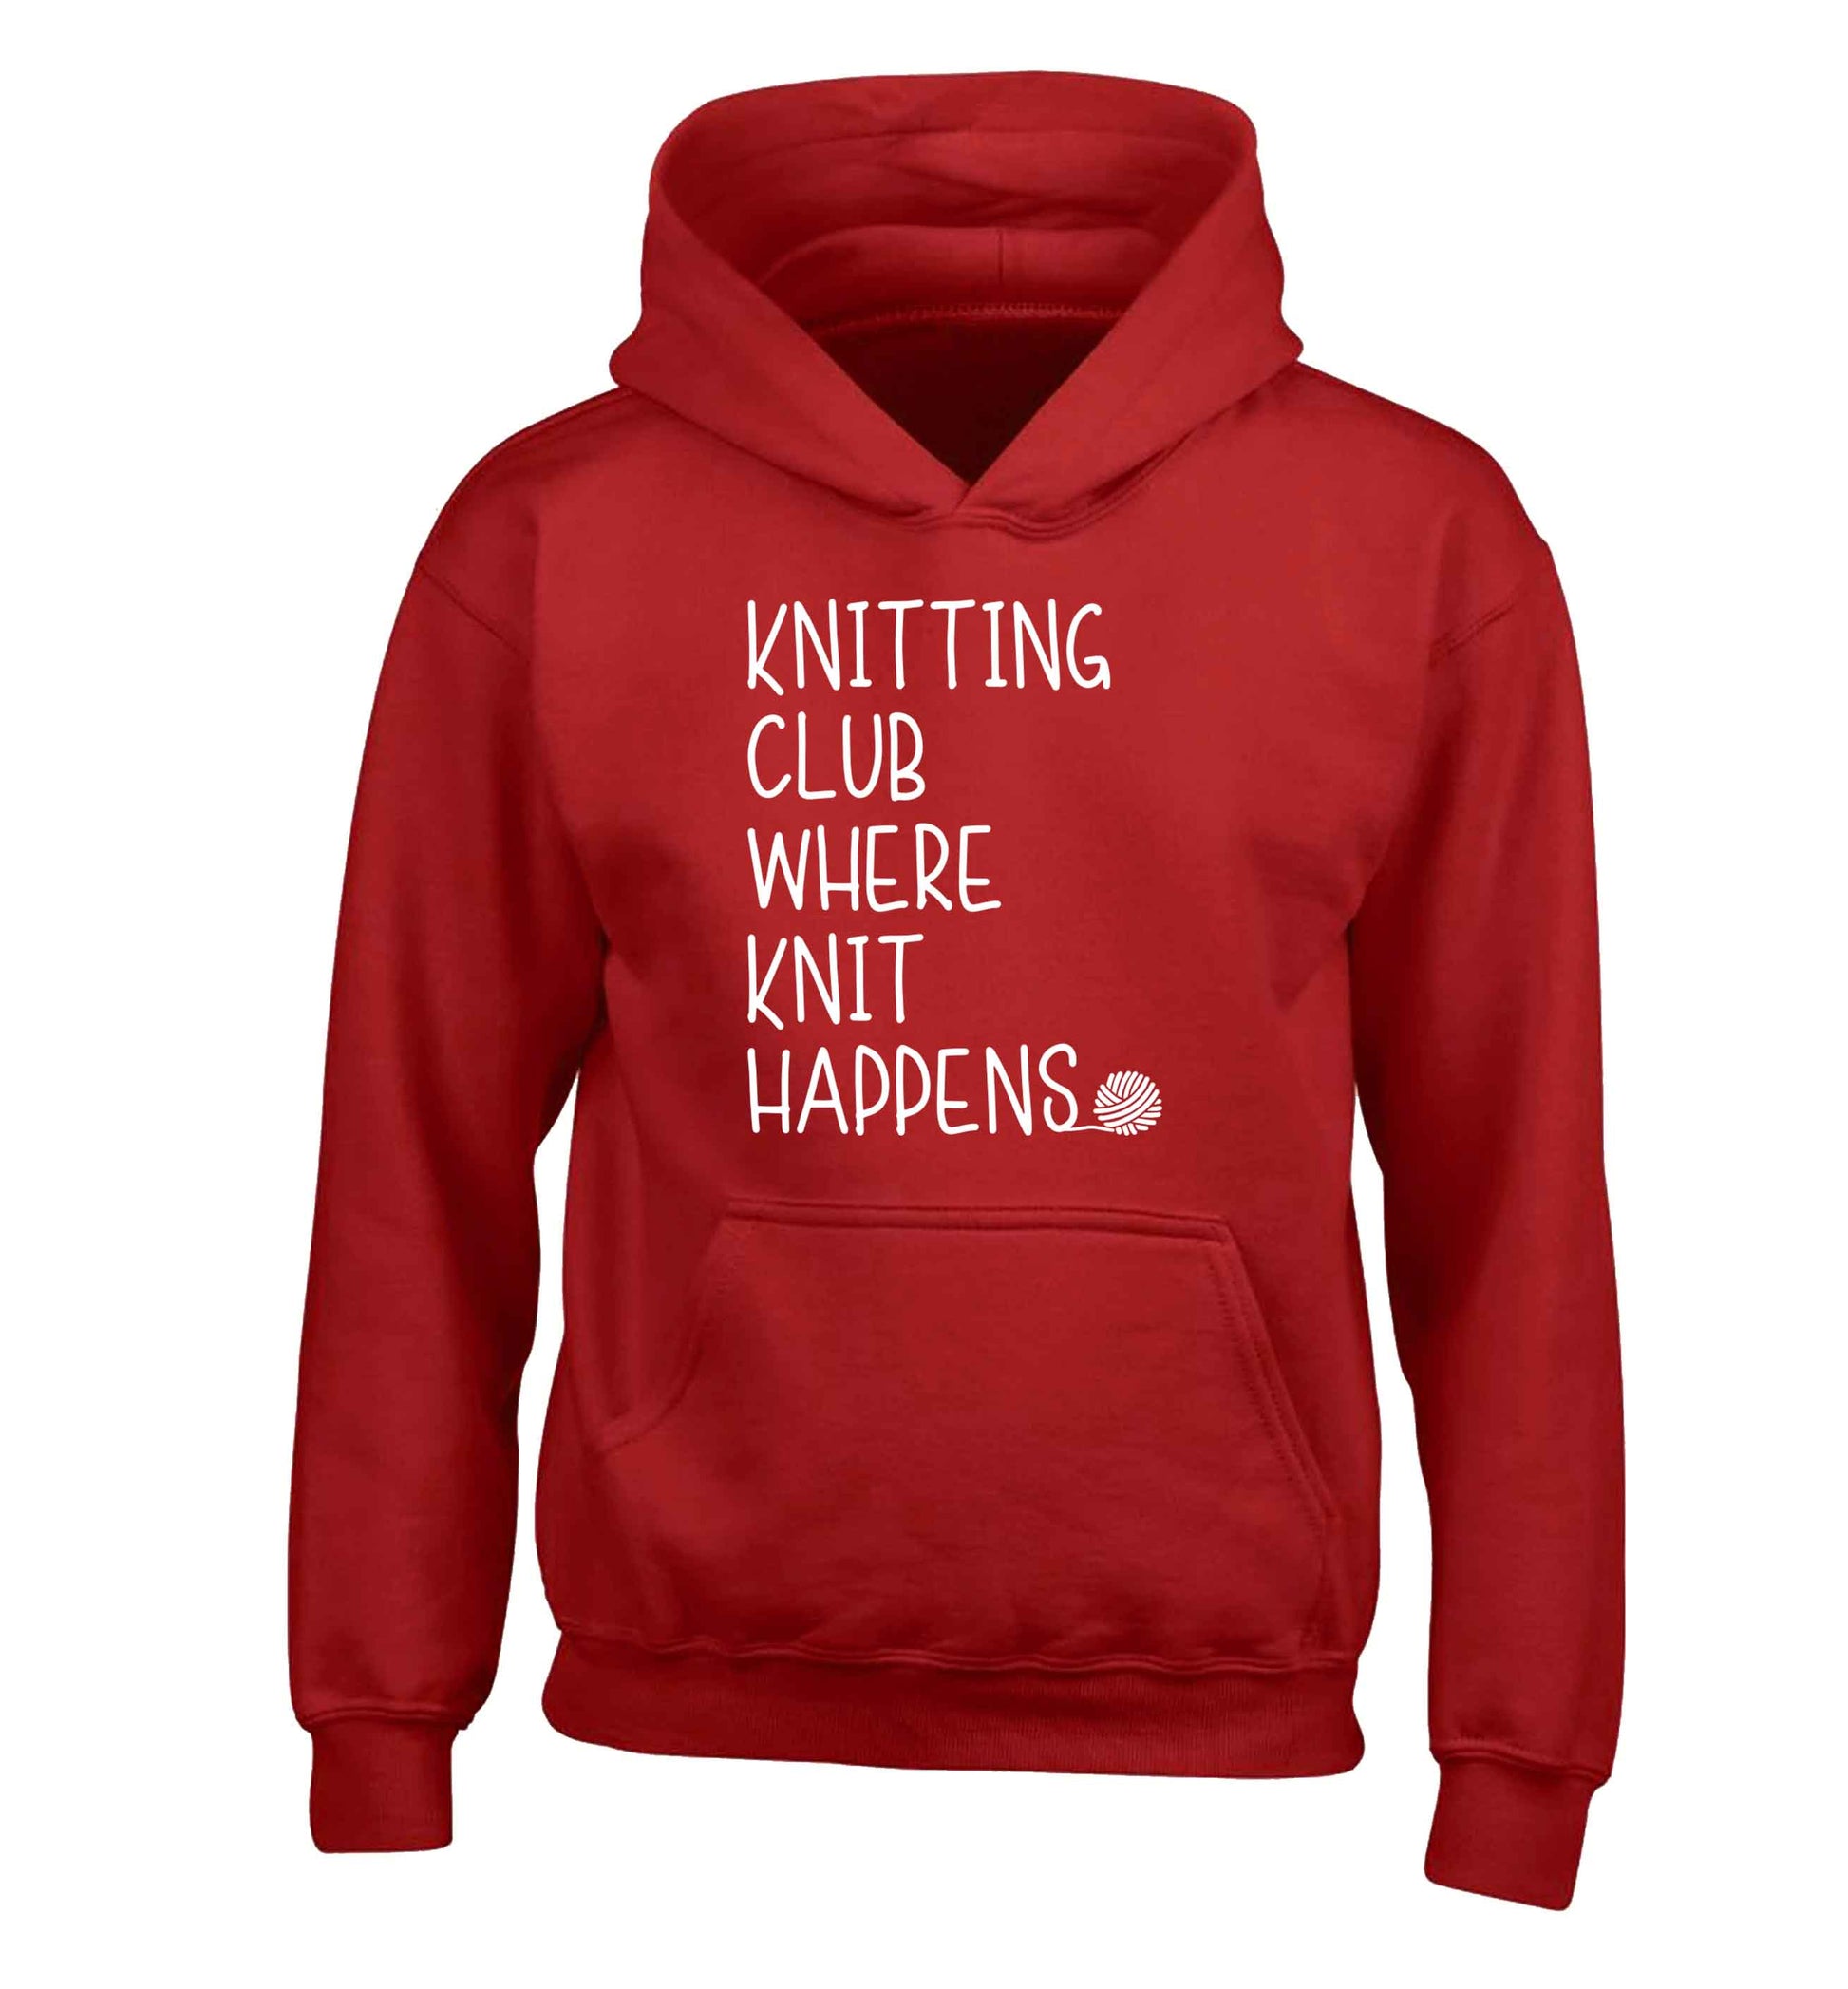 Knitting club where knit happens children's red hoodie 12-13 Years